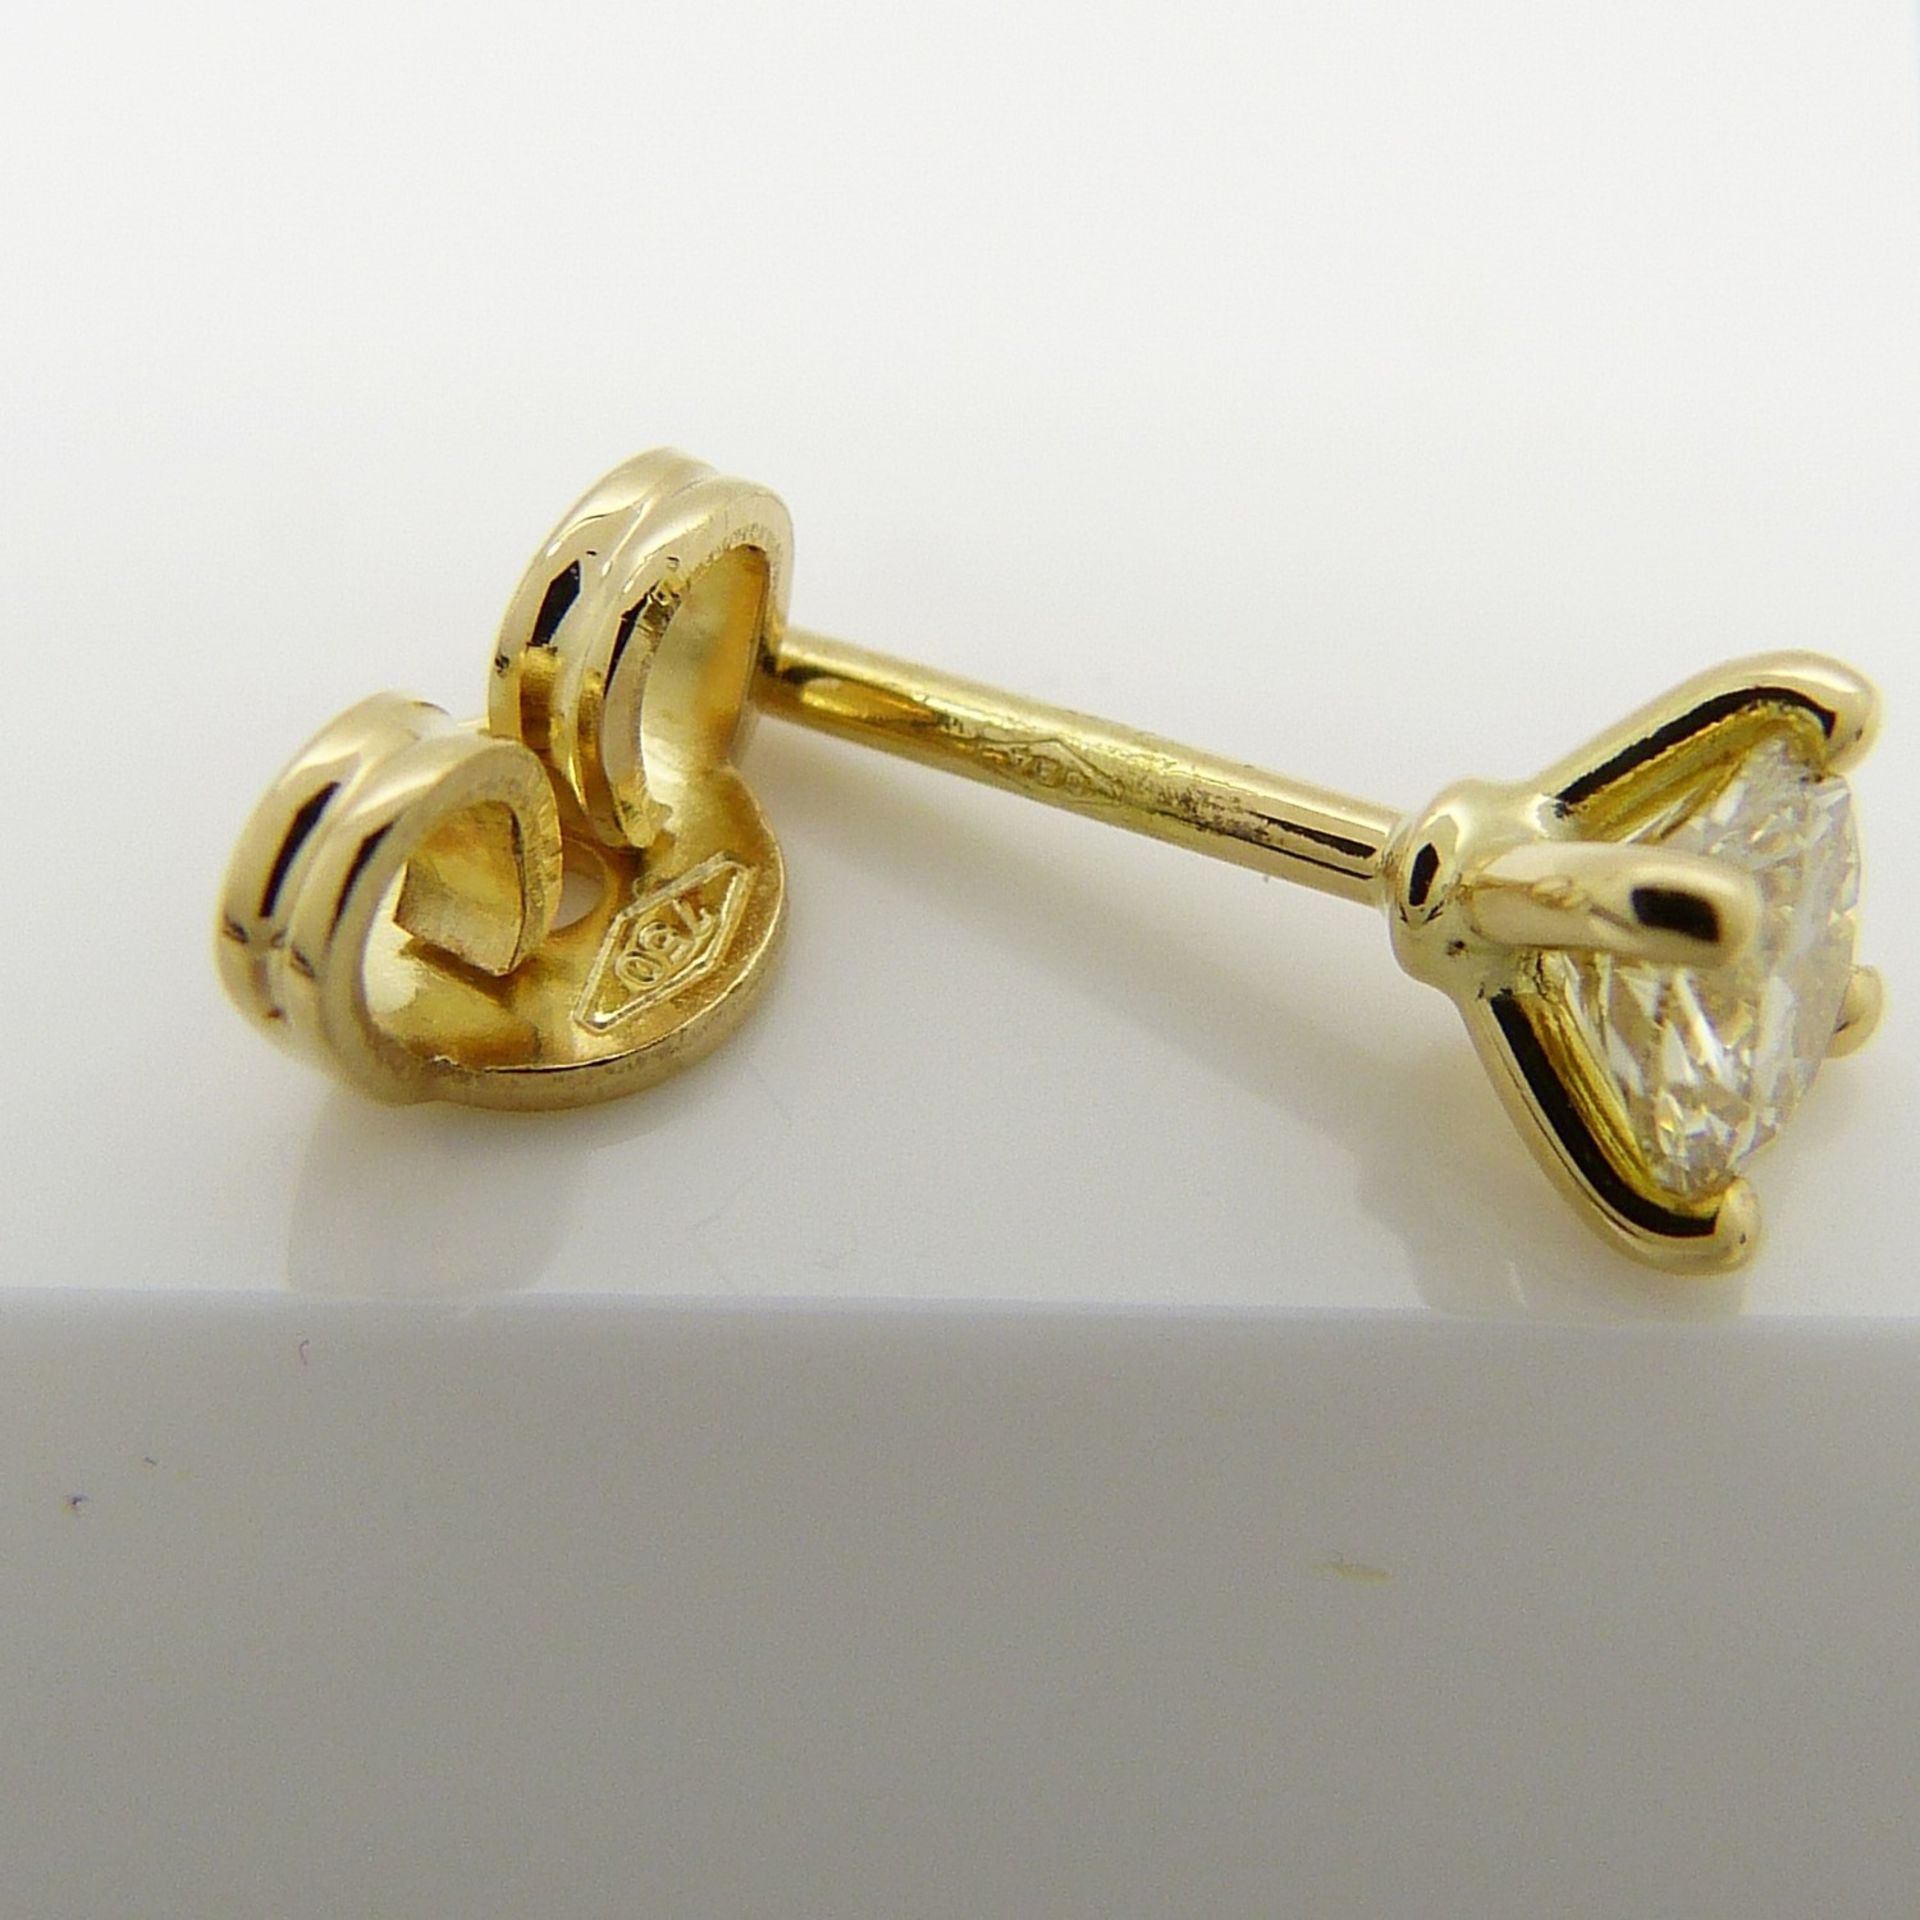 0.51 carat diamond ear studs in 18ct yellow gold, boxed - Image 6 of 6